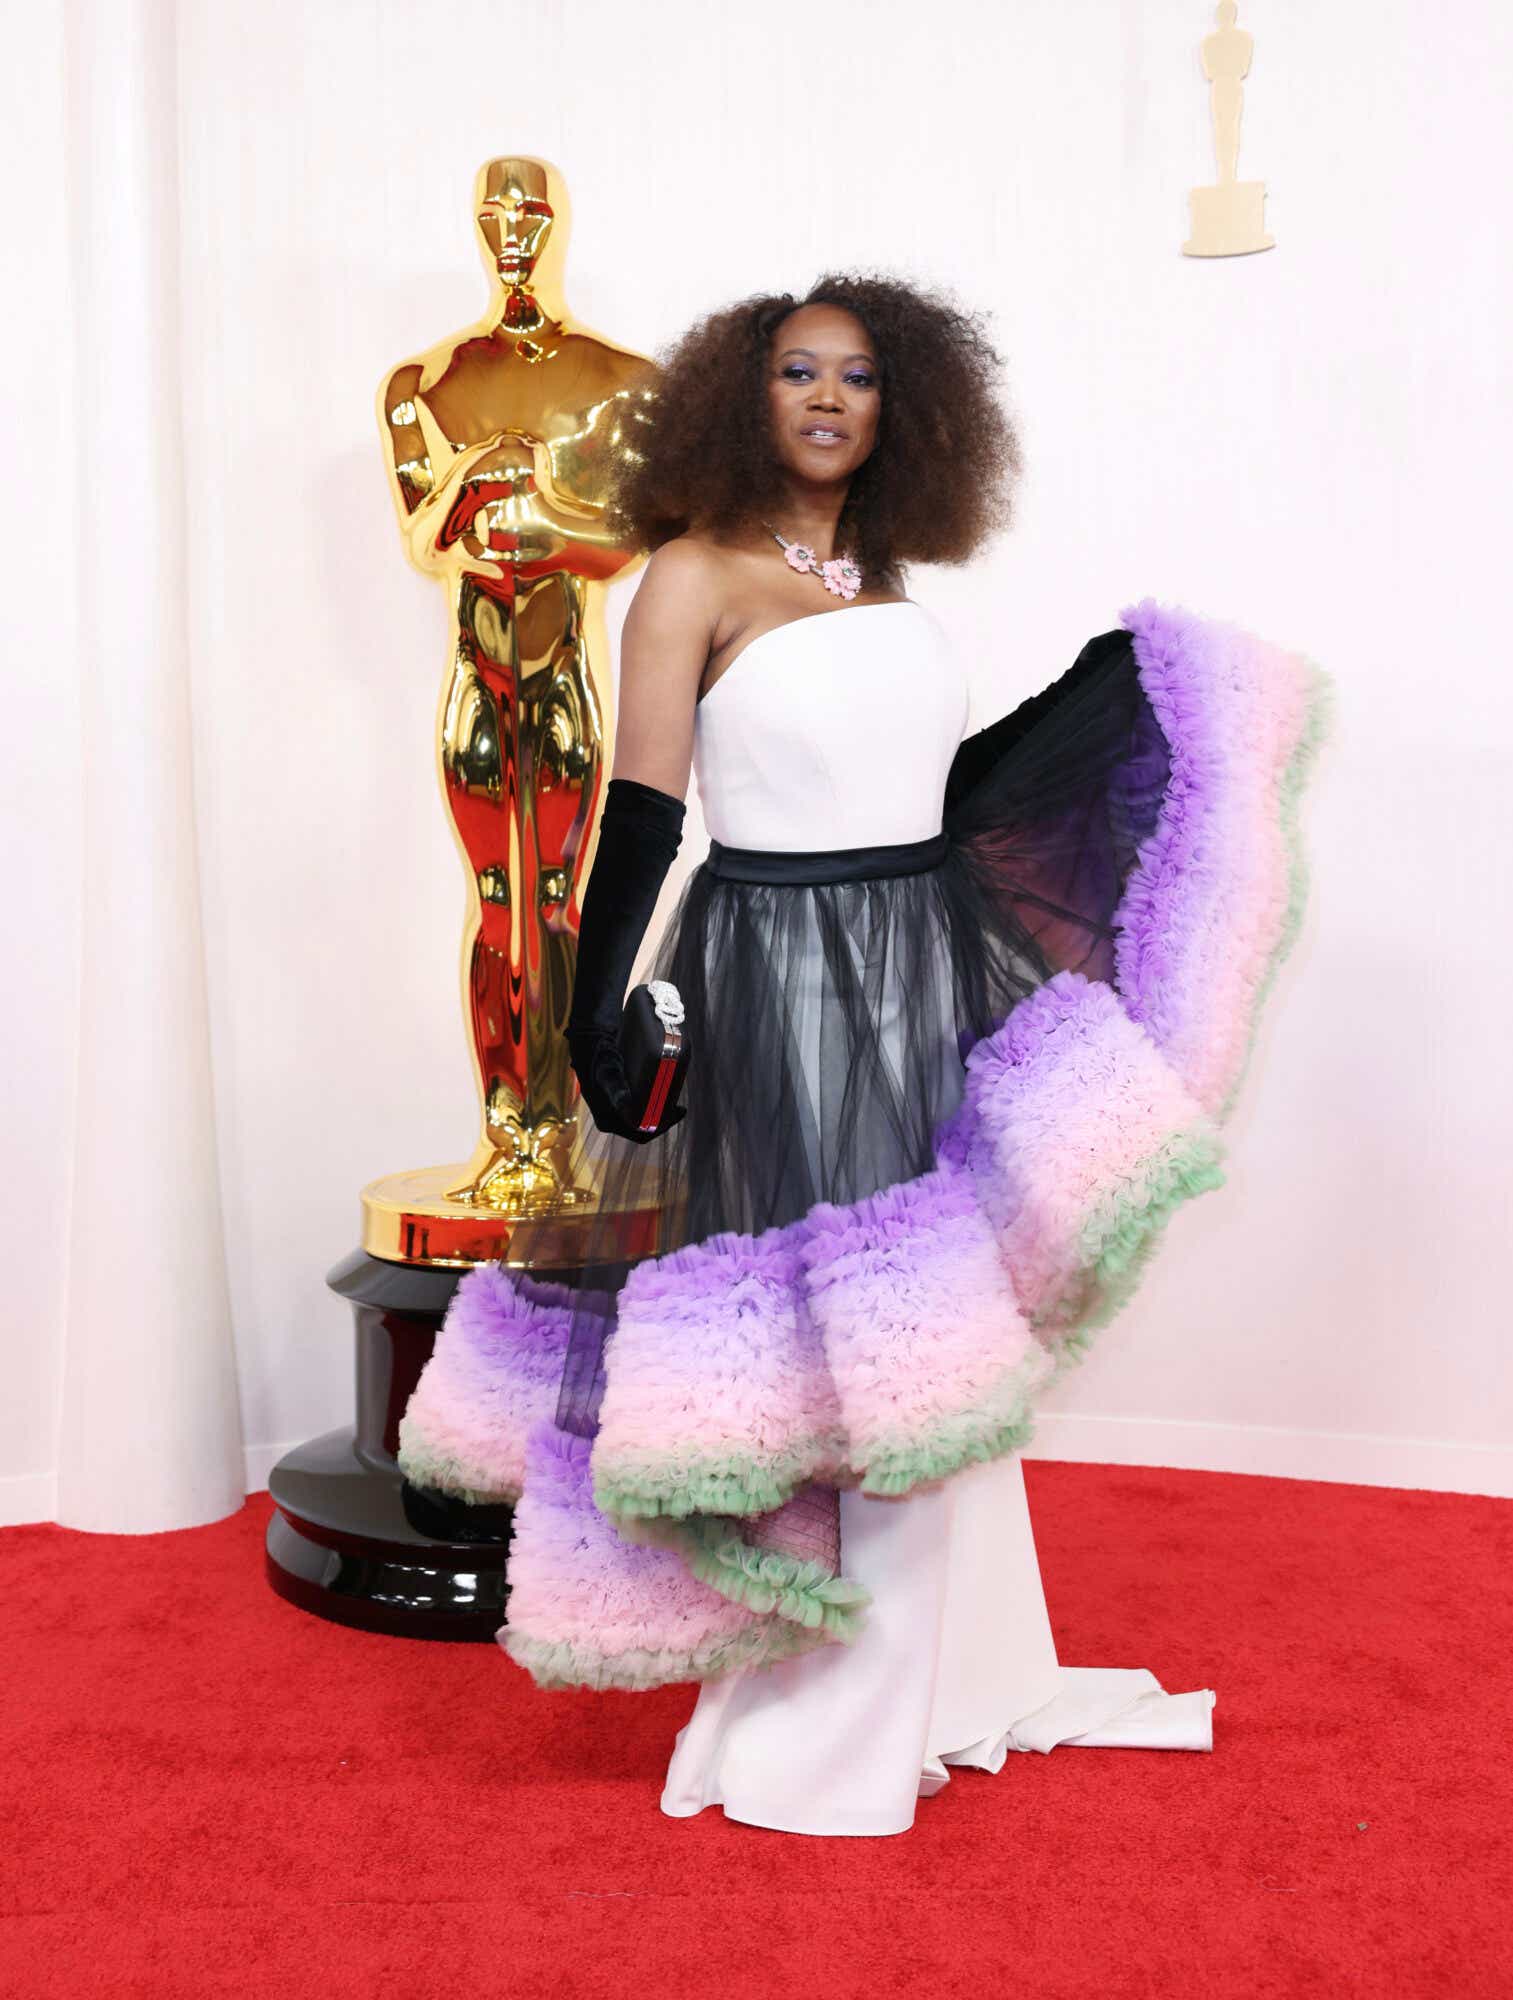 Erika Alexander arrives at the Oscars wearing a white gown with a black tulle skirt overlay. The skirt has purple, pink, and green ruffles. She's also sporting black gloves.